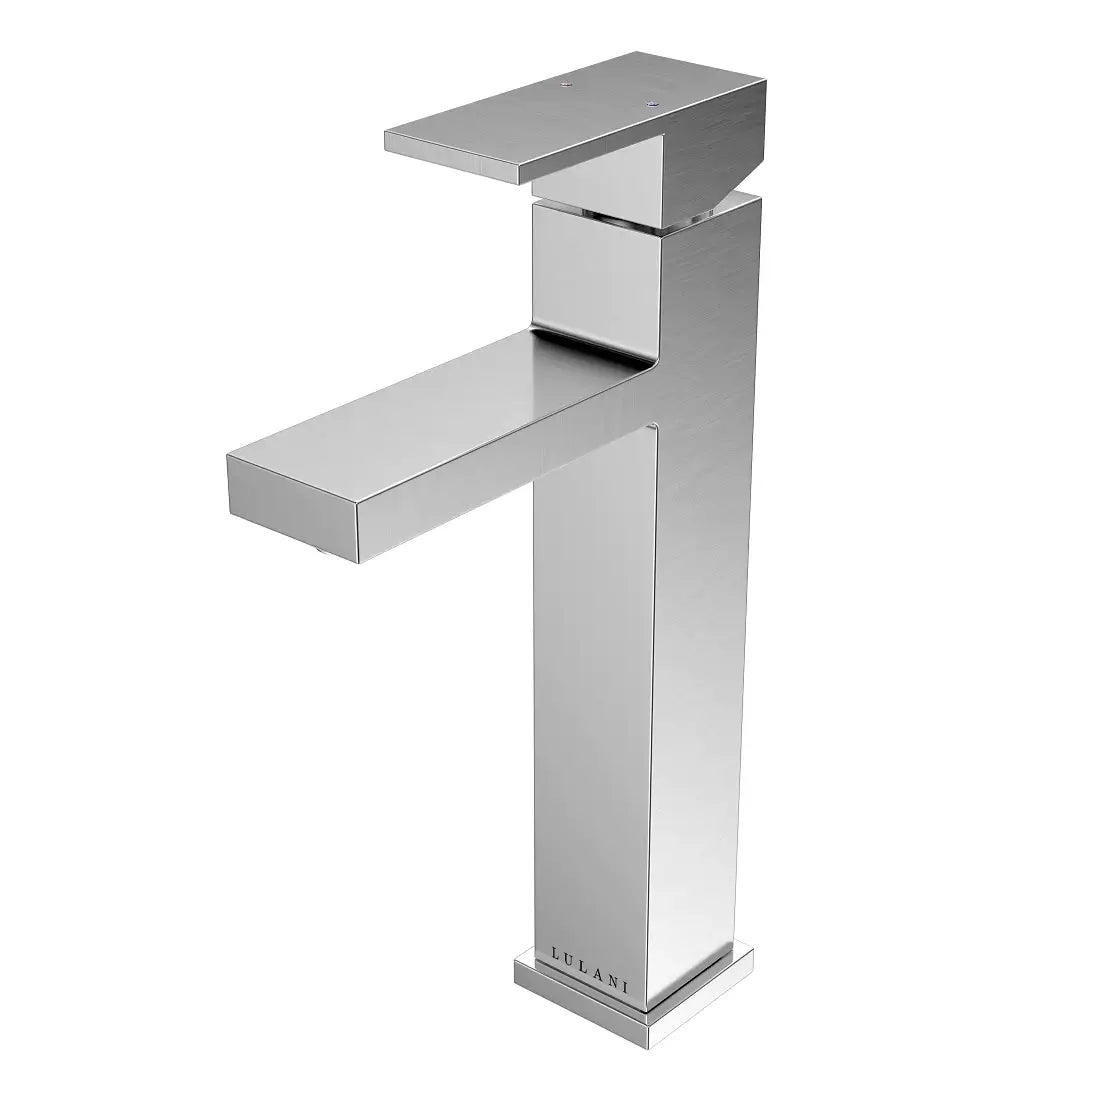 Santorini - Stainless Steel Vessel Bathroom Faucet with drain assembly in Brushed Stainless